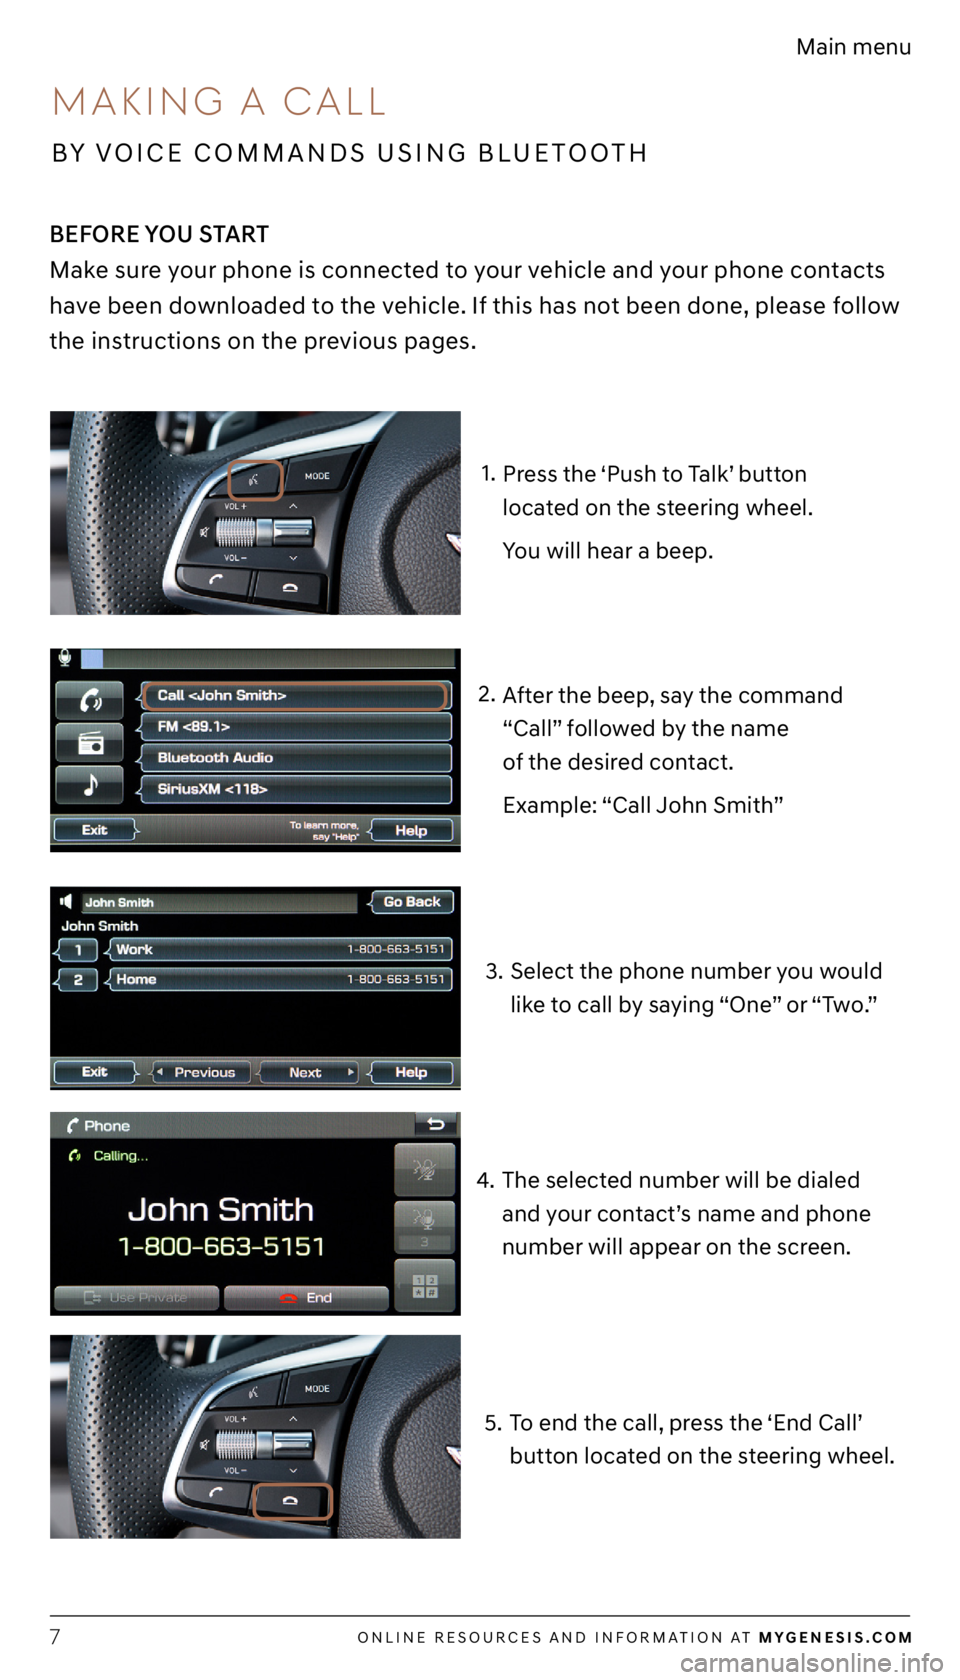 GENESIS G70 2021  Getting Started Guide ONLINE RESOURCES AND INFORMATION AT MYGENESIS.COM7
Main menu
Press the ‘Push to Talk’ button 
located on the steering wheel. 
You will hear a beep.
After the beep, say the command 
“Call” foll